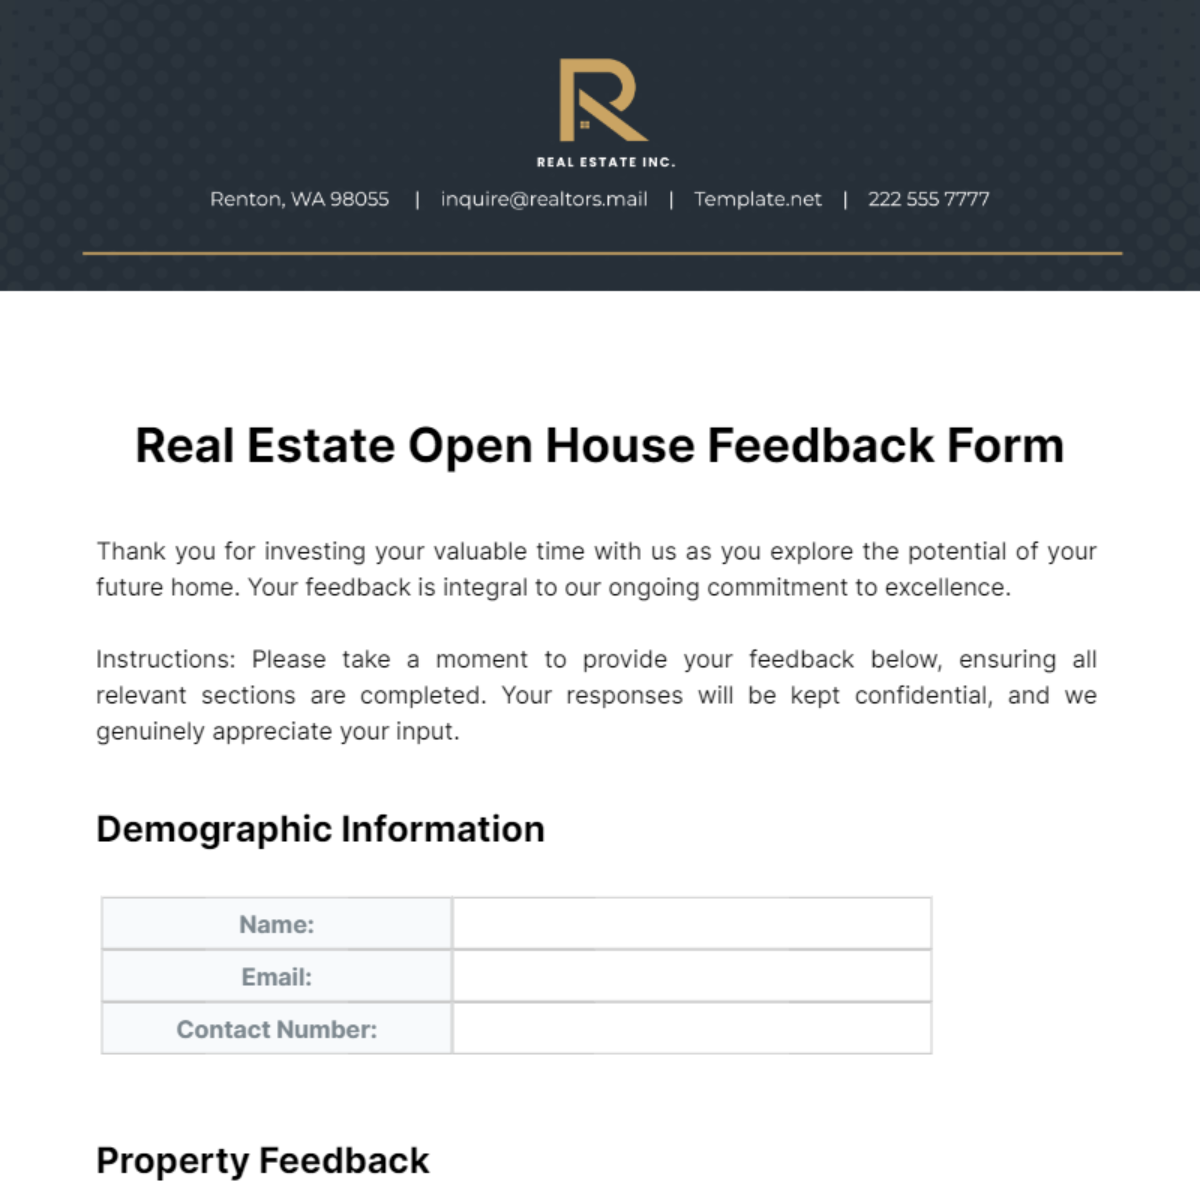 Real Estate Open House Feedback Form Template